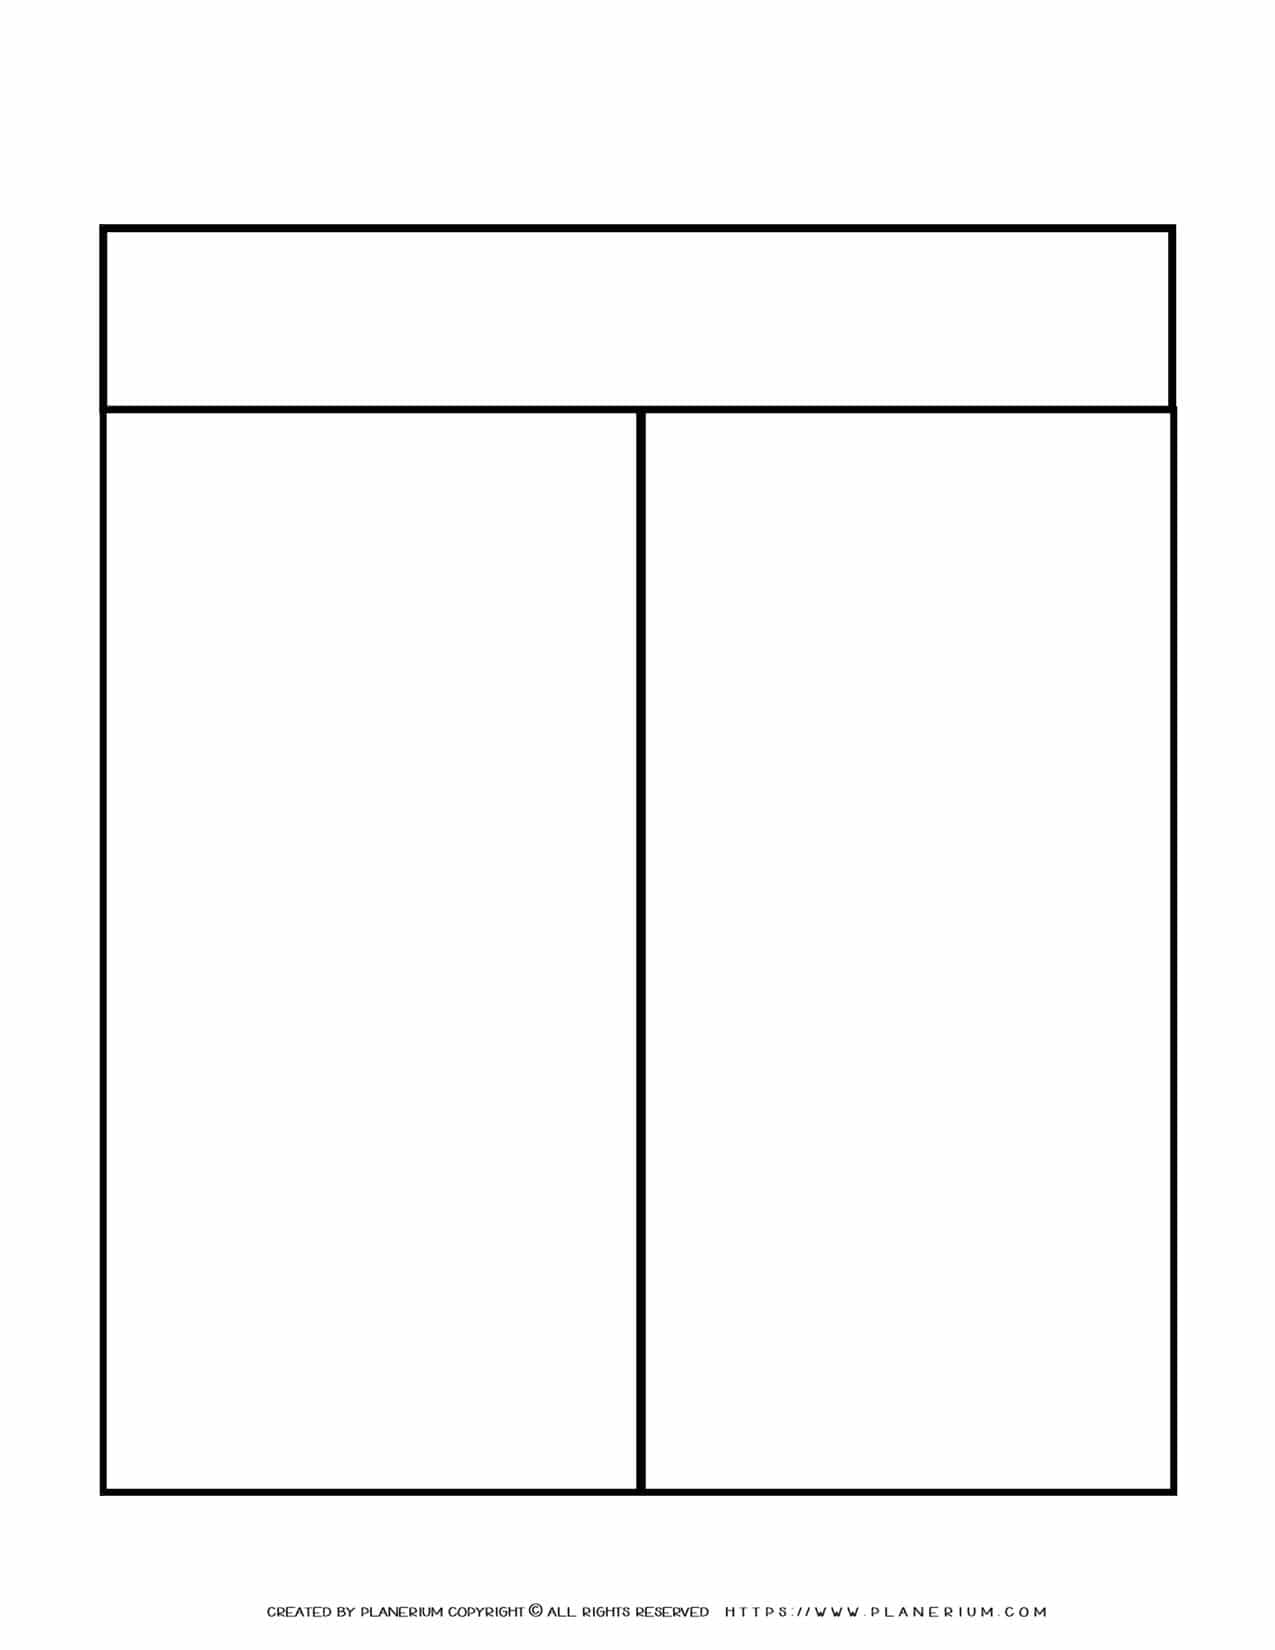 Graphic Organizer Templates - Chart with Two Column | Planerium